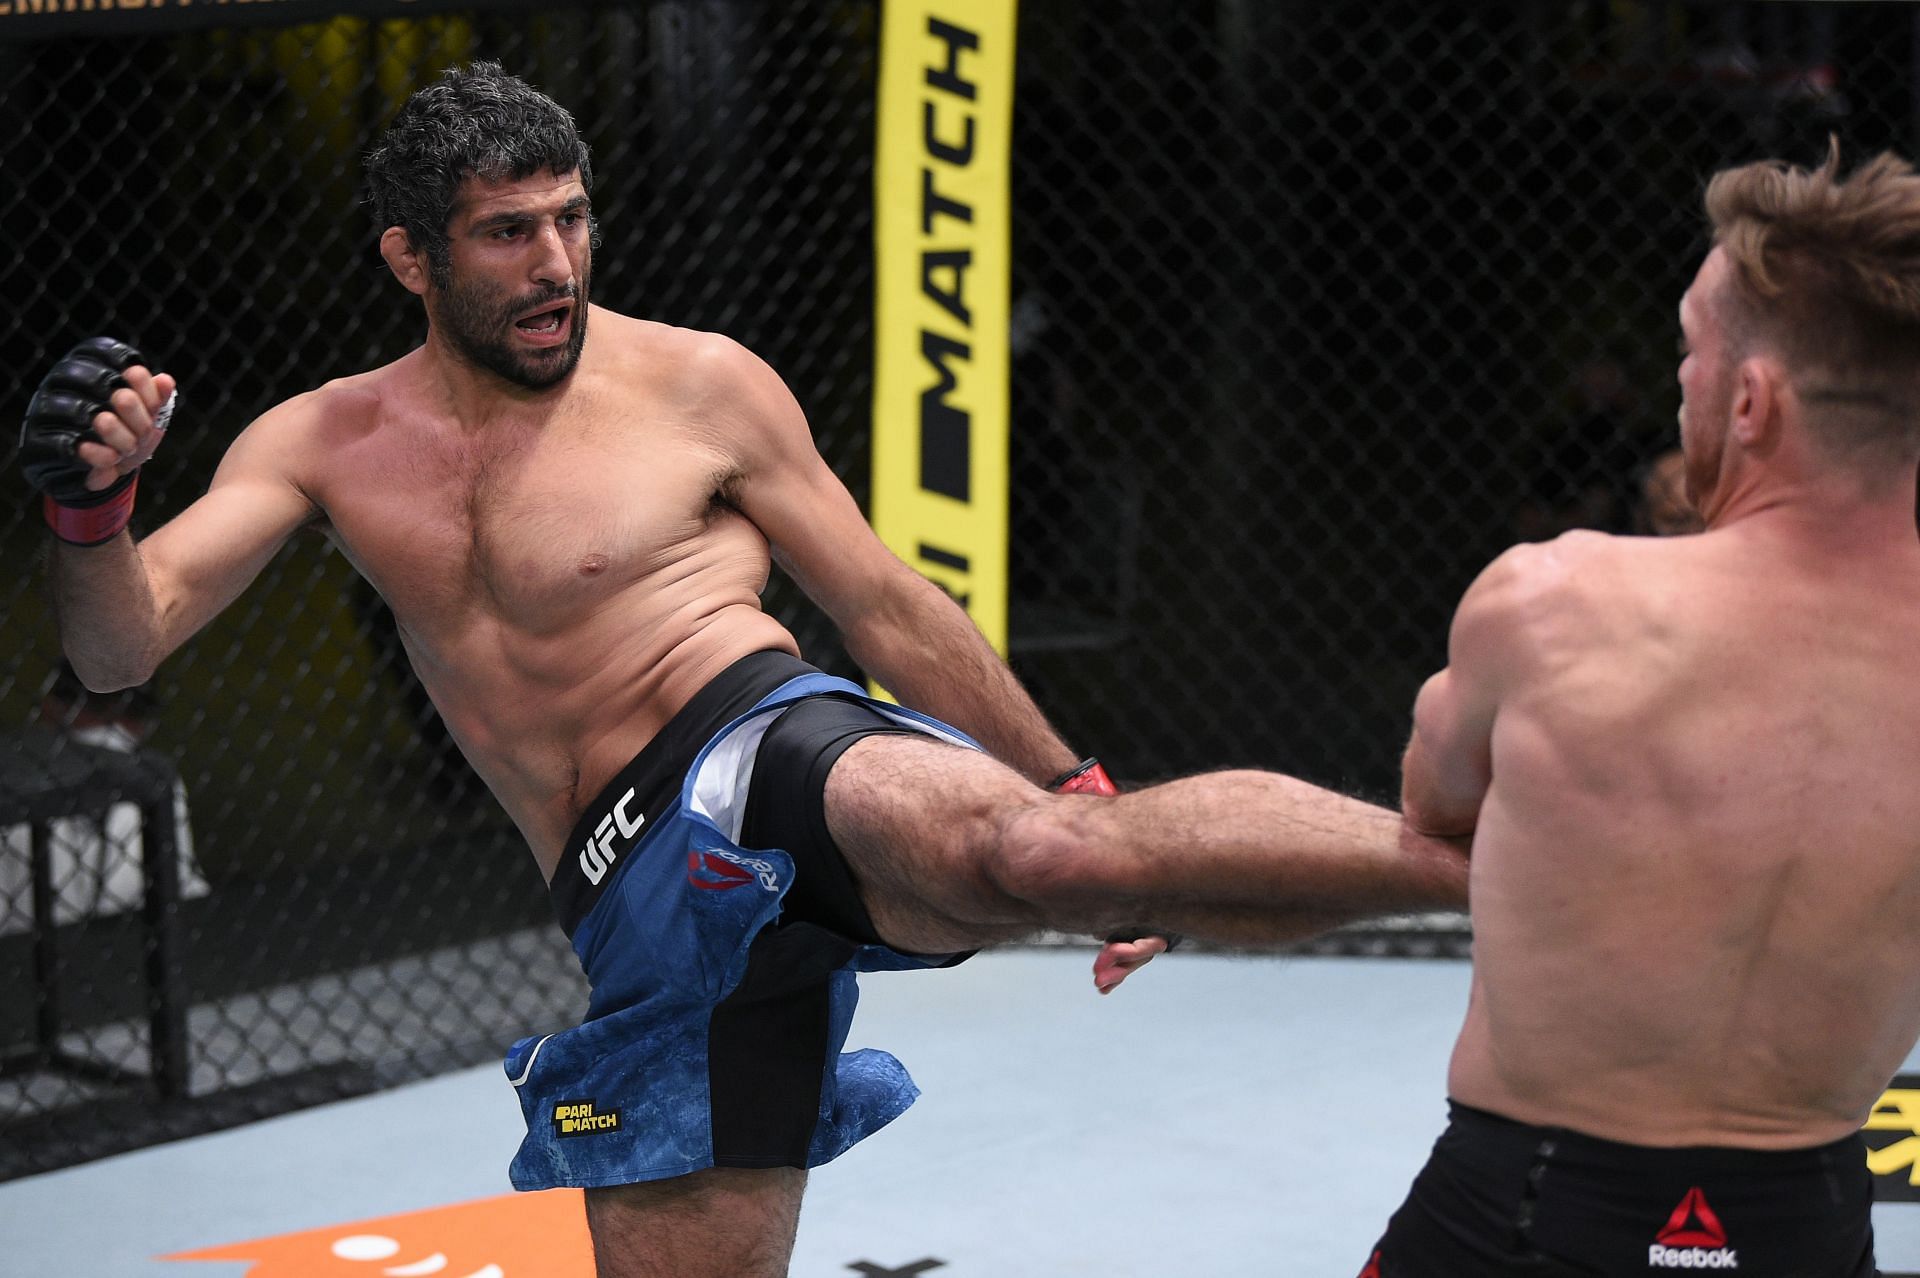 Beneil Dariush holds a record of 21-4-1